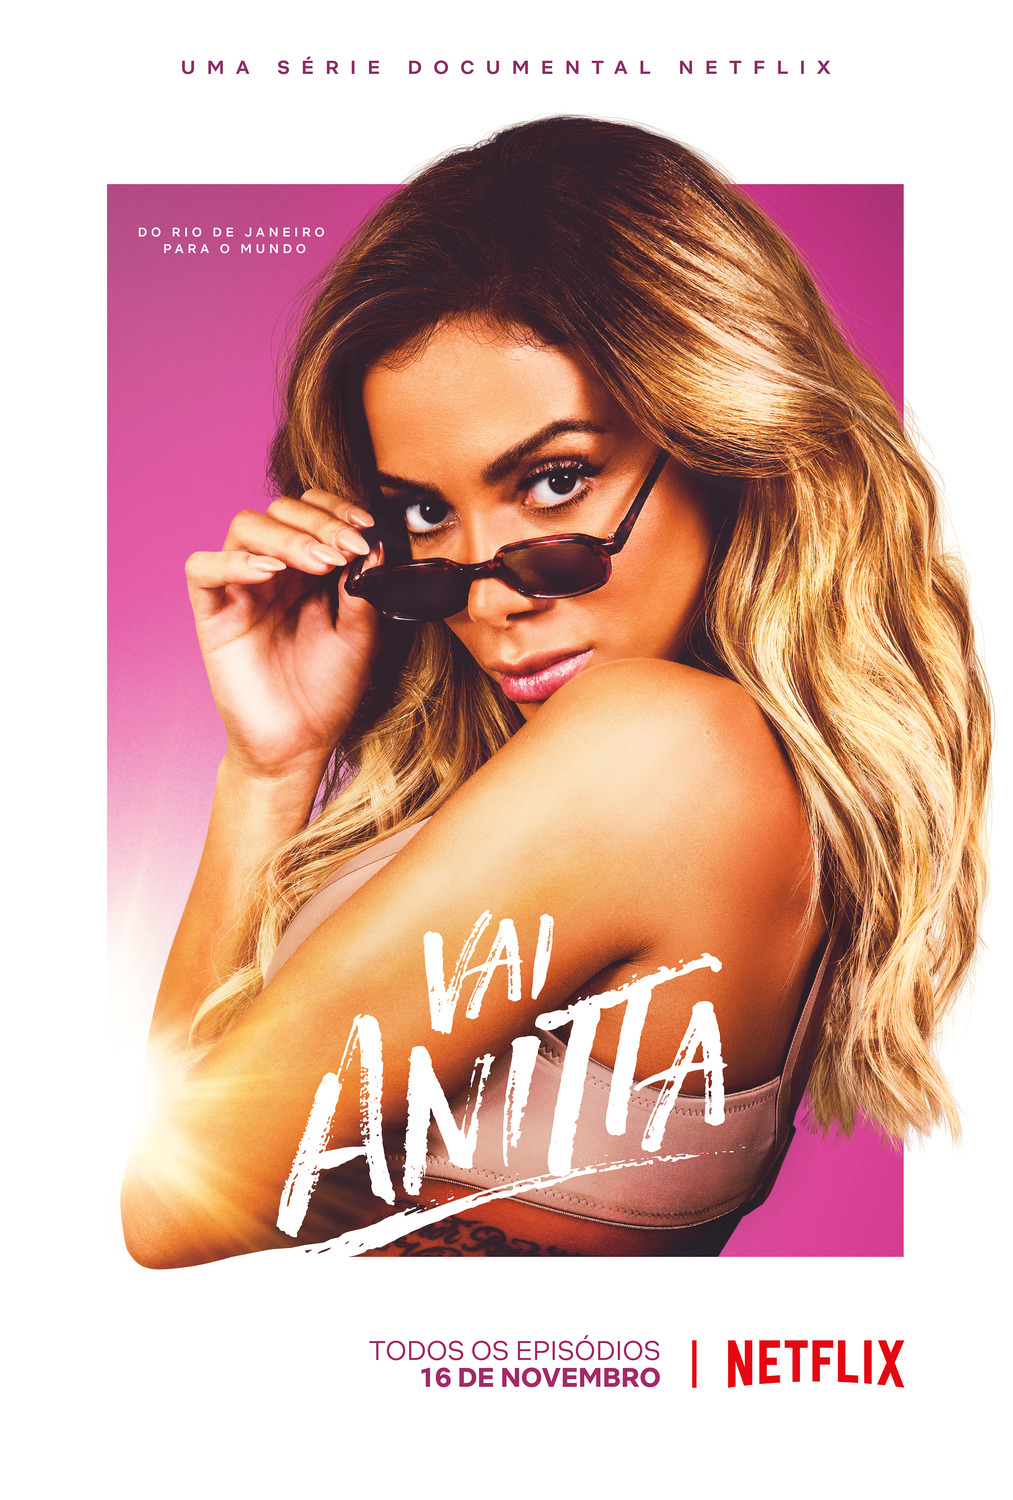 Extra Large TV Poster Image for Vai Anitta 